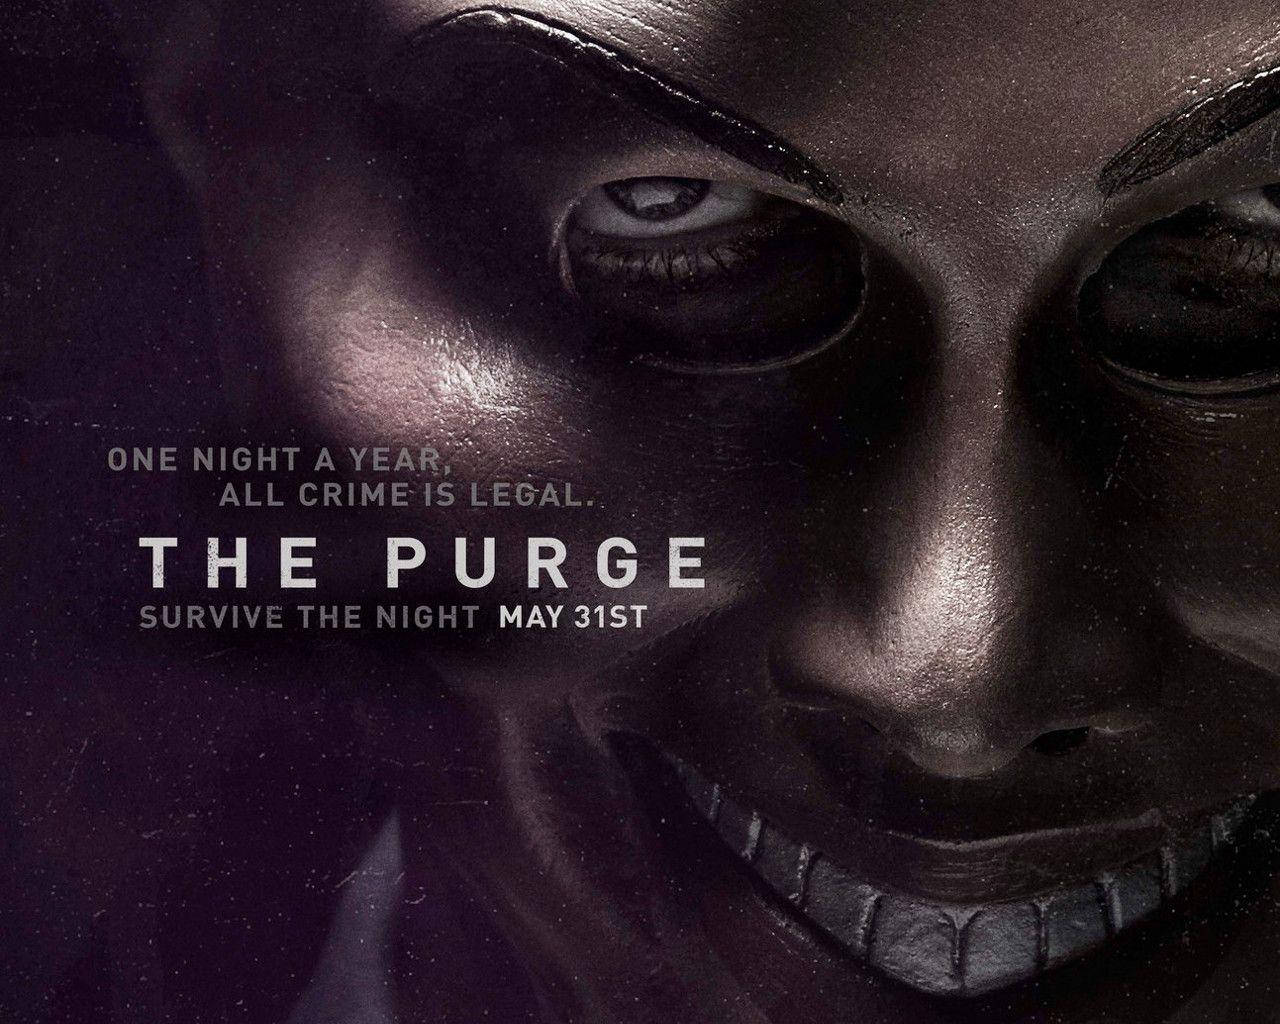 The Purge Movie Poster Background